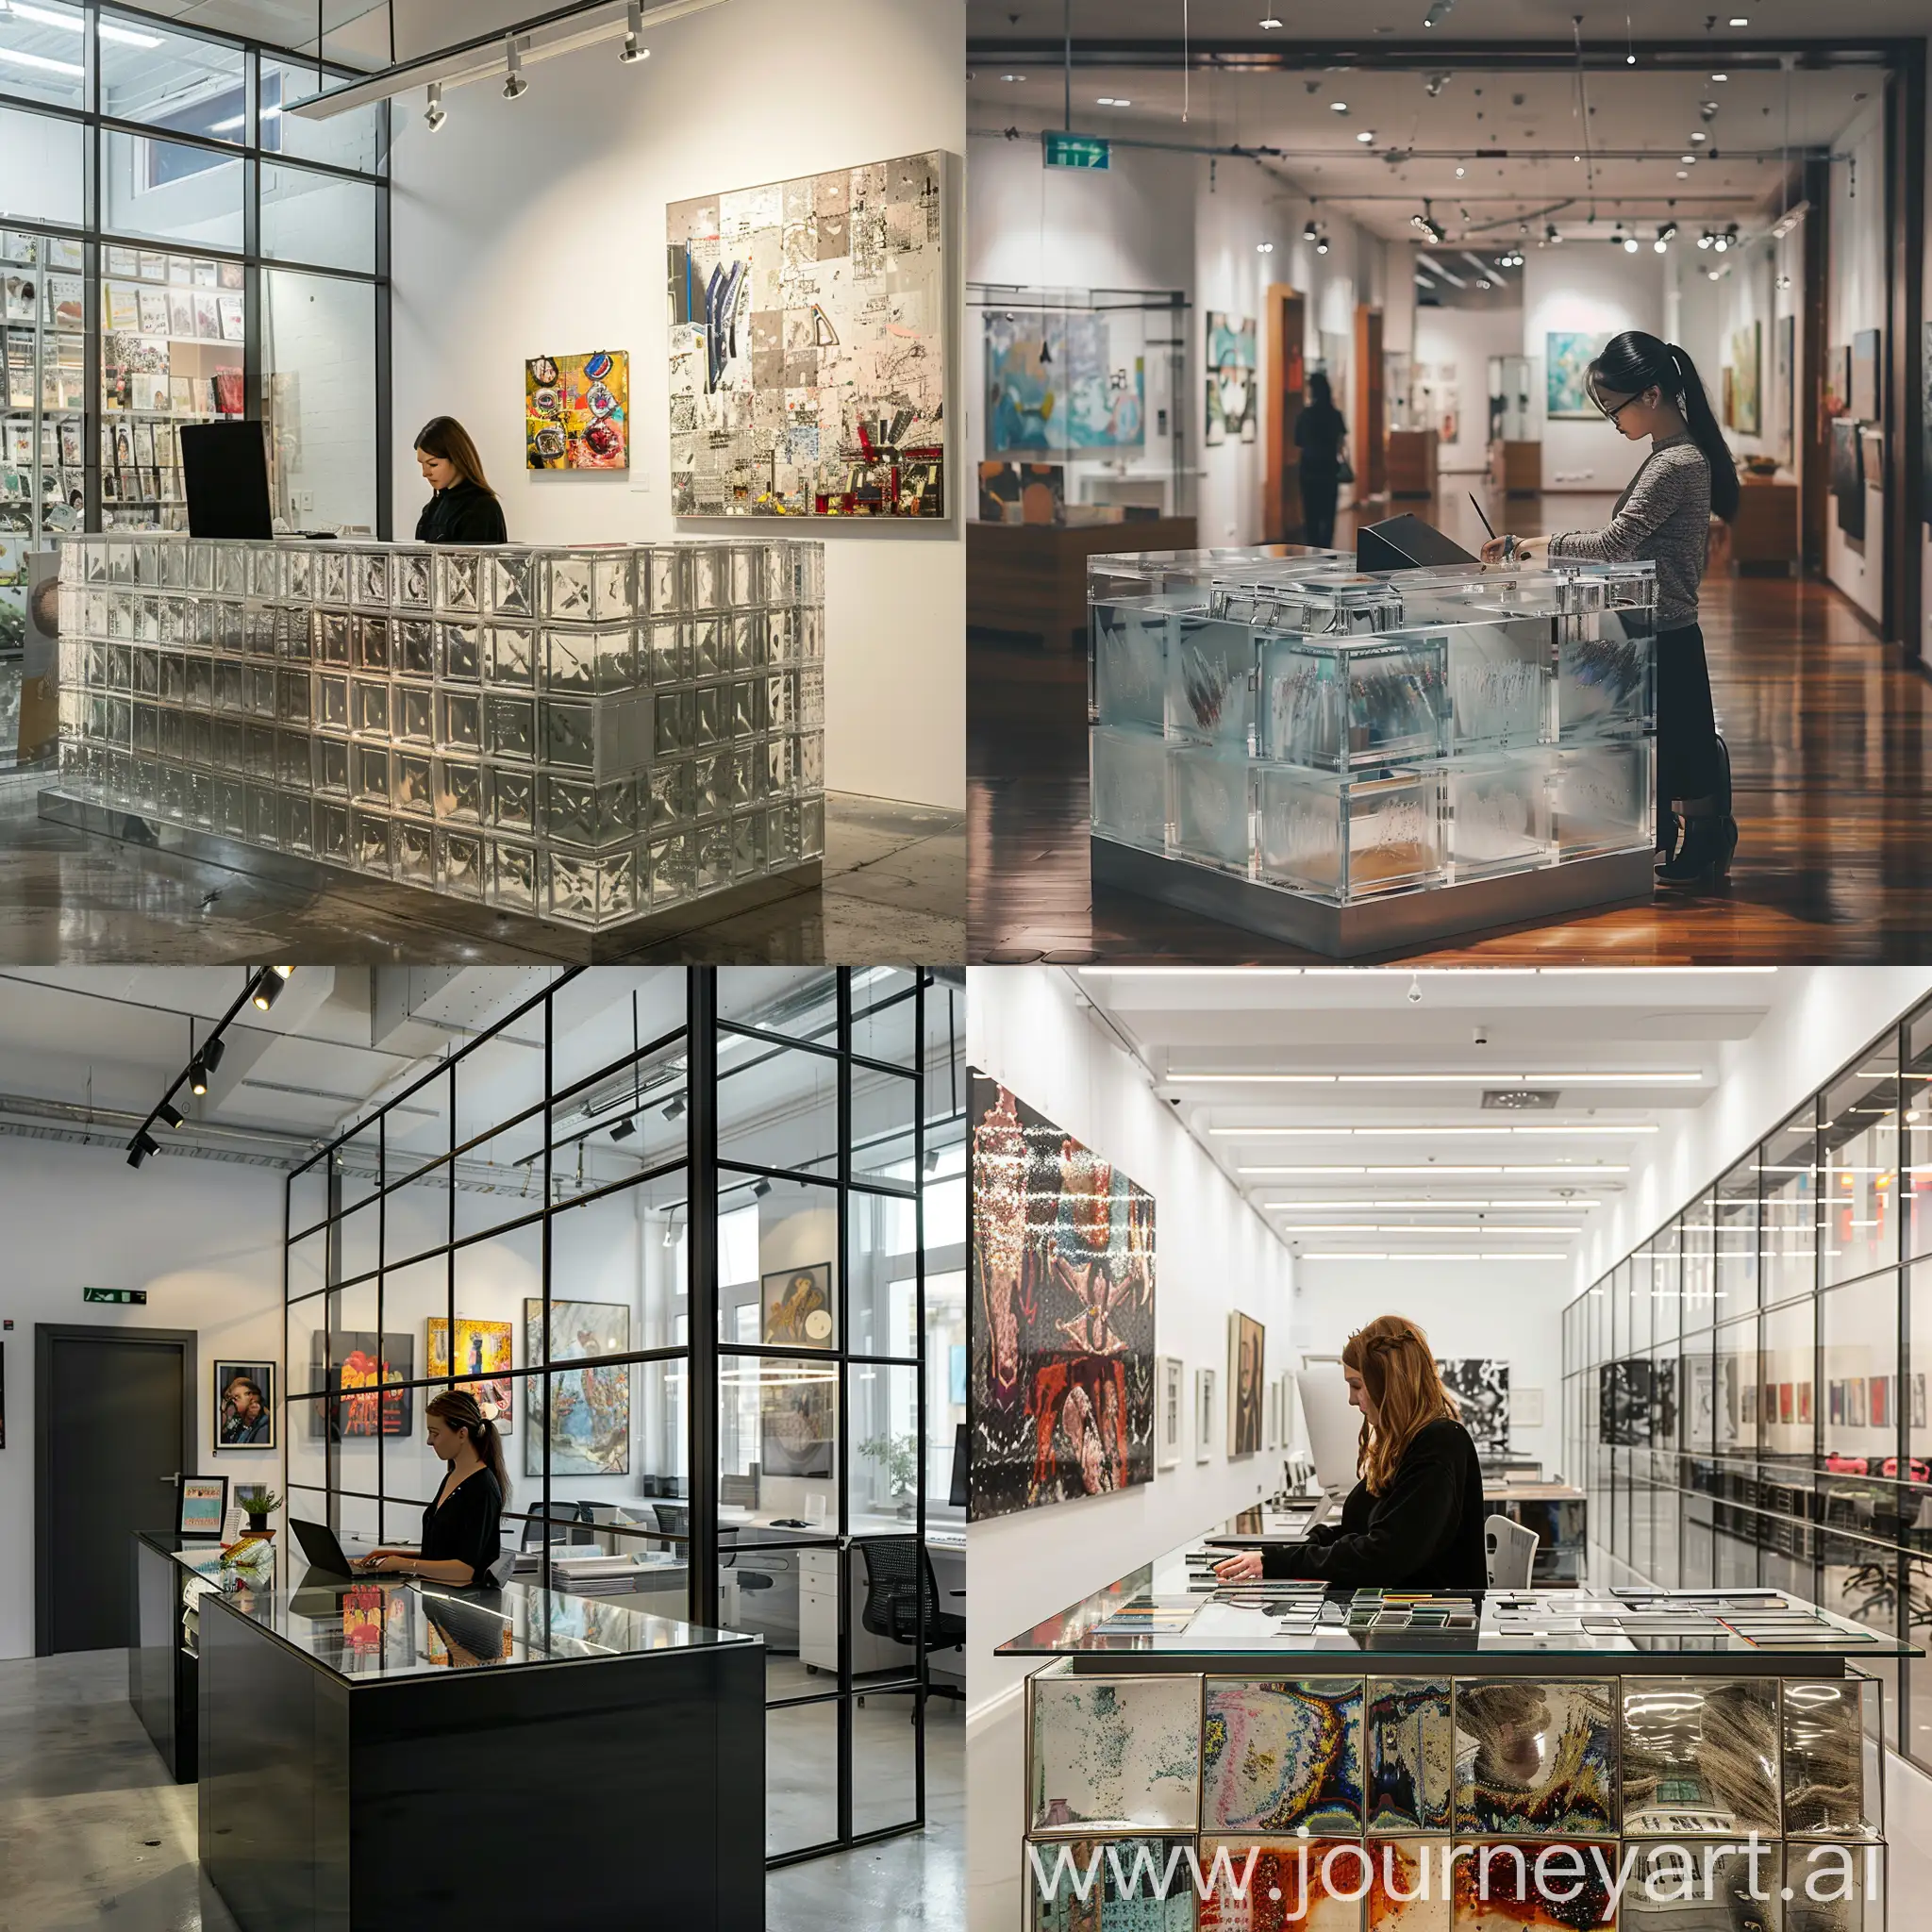 Art-Gallery-Receptionist-with-GlassCovered-Desk-in-Modern-Office-Building